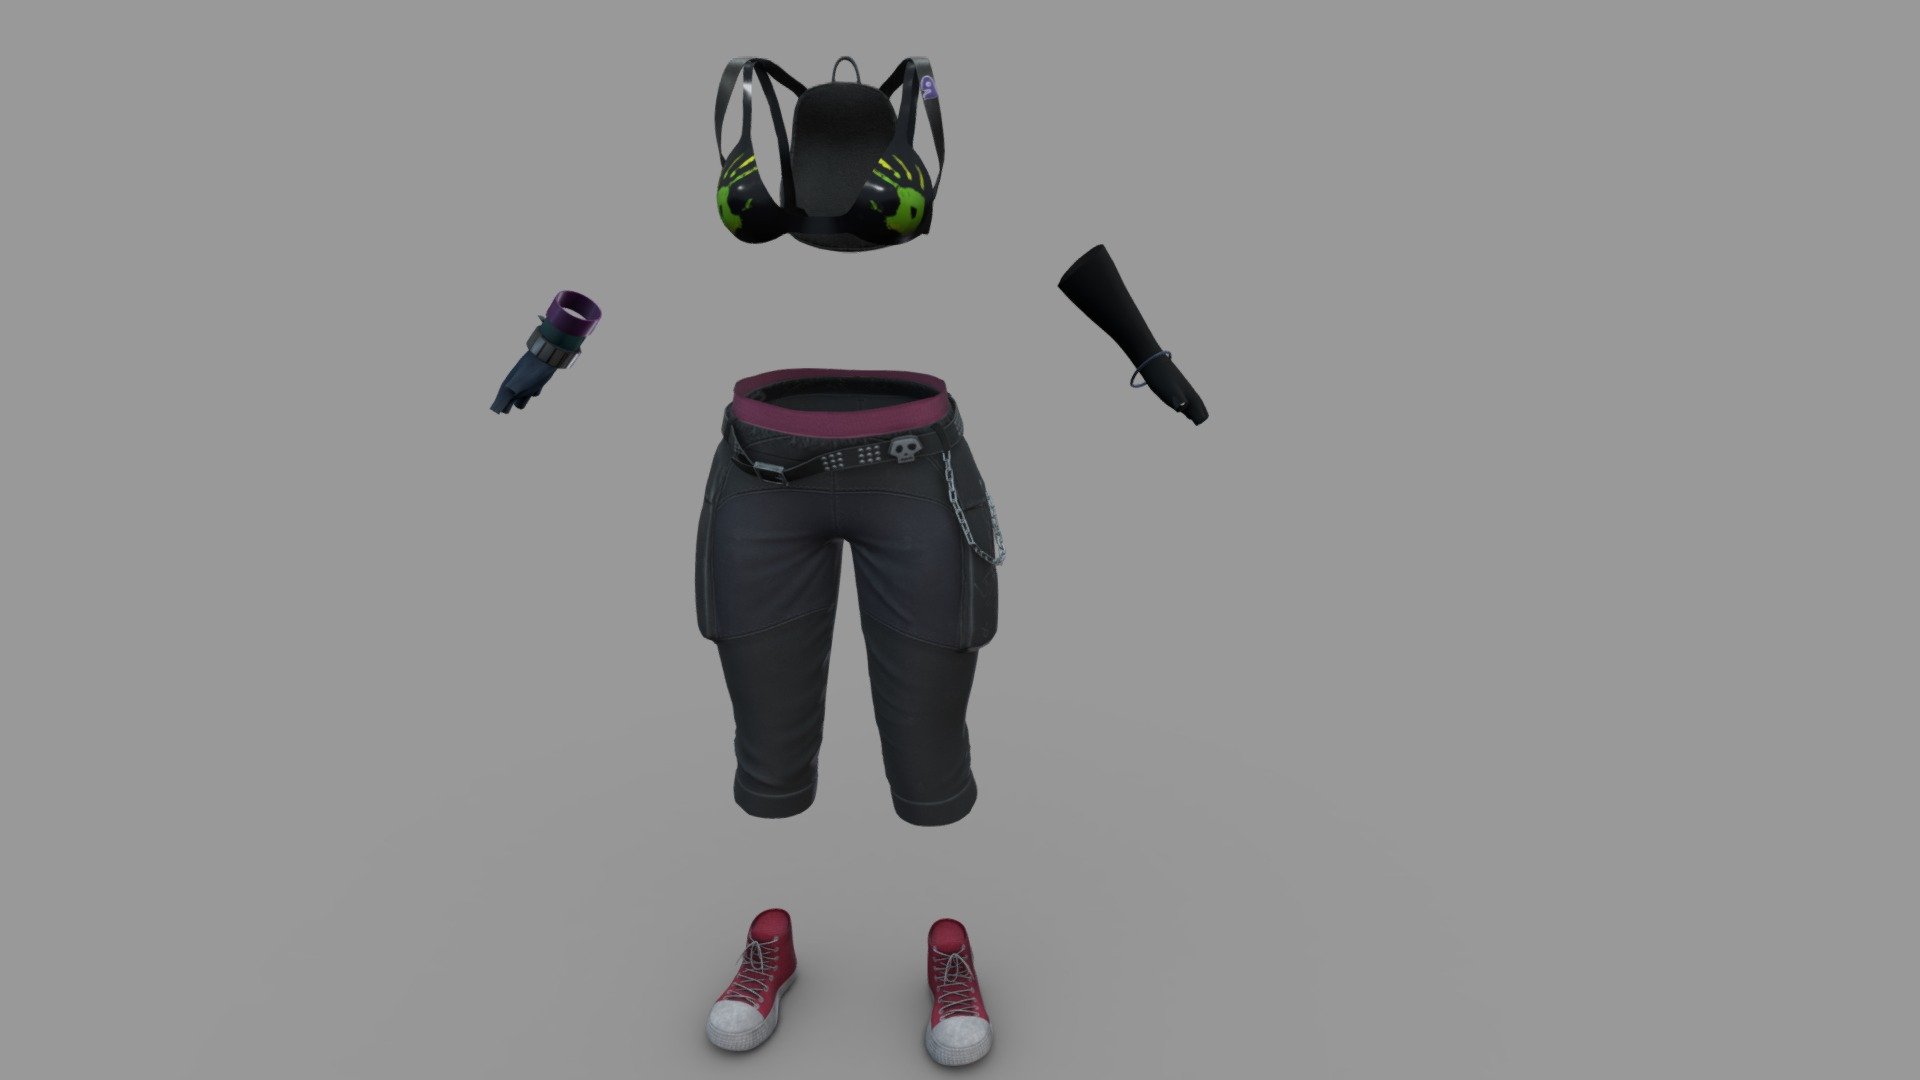 Top + Backpack + Pants + Boots + Gloves

Can be fitted to any character

Clean topology

No overlapping smart optimum unwrapped UVs

High-quality realistic textures

FBX, OBJ, gITF, USDZ (request other formats)

PBR or Classic

Please ask any other questions.

Type     user:3dia &ldquo;search term